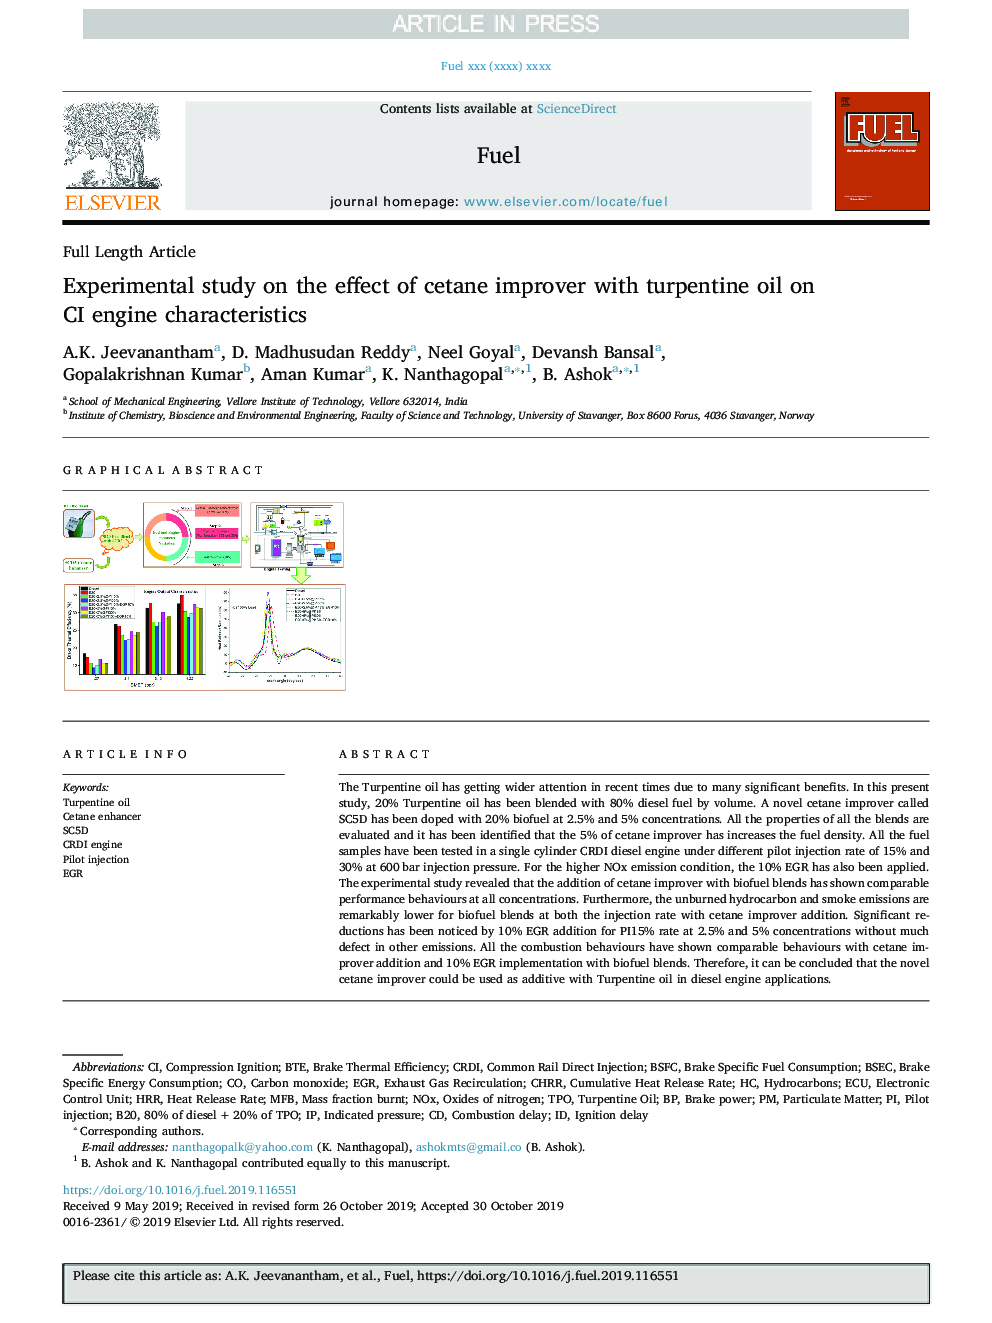 Experimental study on the effect of cetane improver with turpentine oil on CI engine characteristics